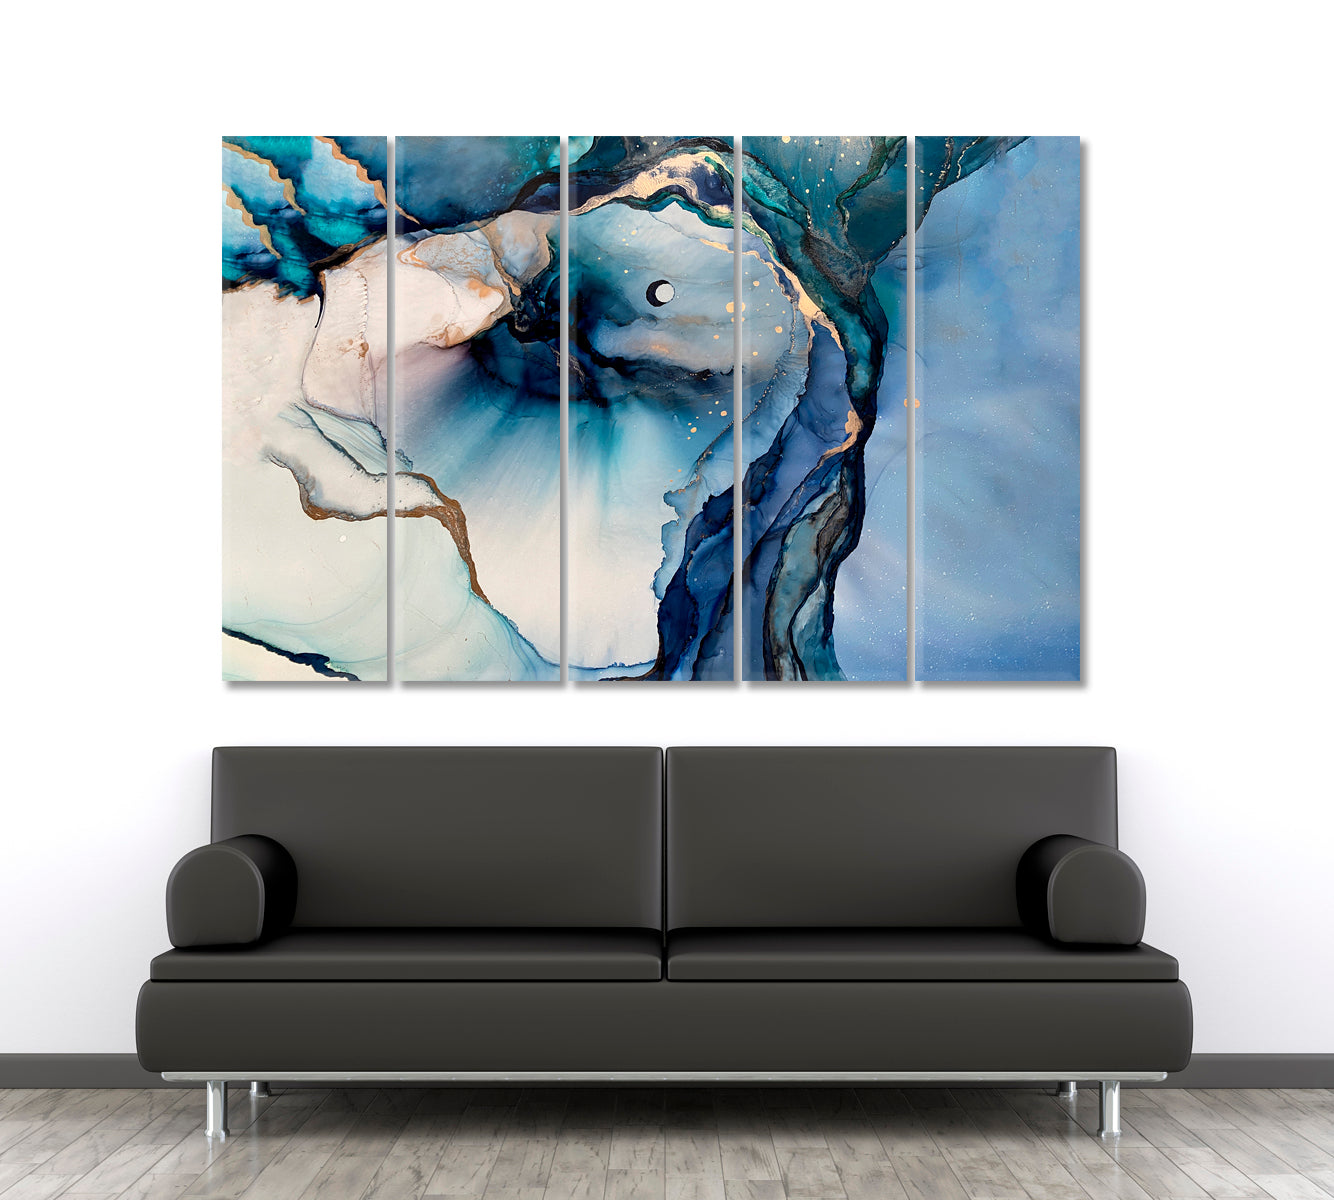 ABSTRACT CLOUDS Marble Blue Trendy Contemporary Fluid Poster Fluid Art, Oriental Marbling Canvas Print Artesty 5 panels 36" x 24" 